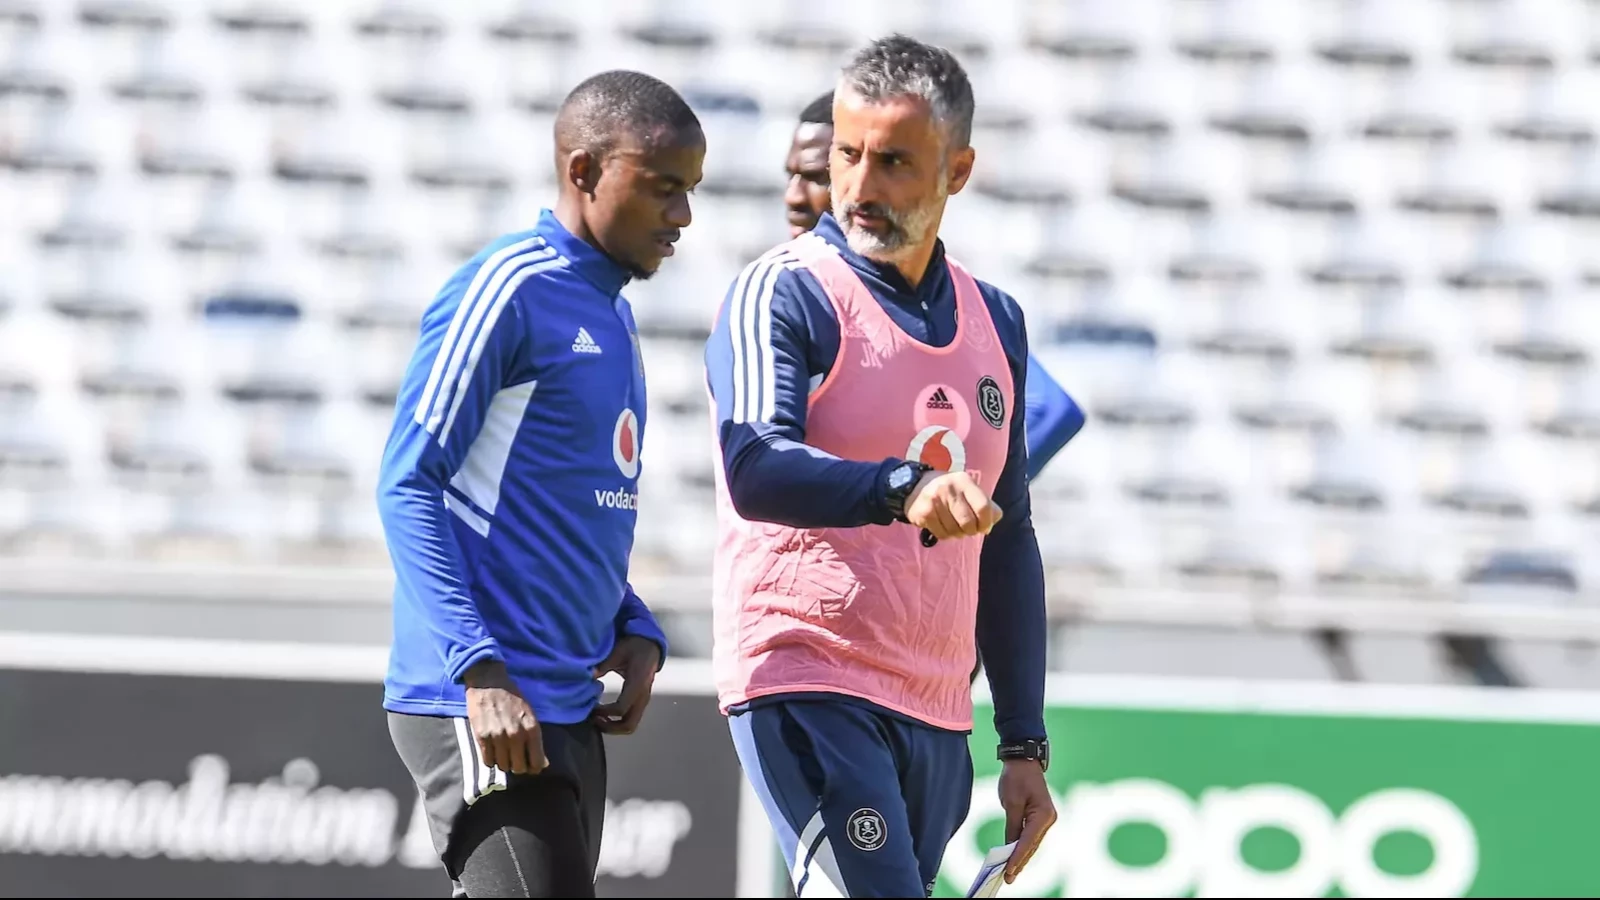 Riveiro wants to see Orlando Stadium sold out when Pirates plays